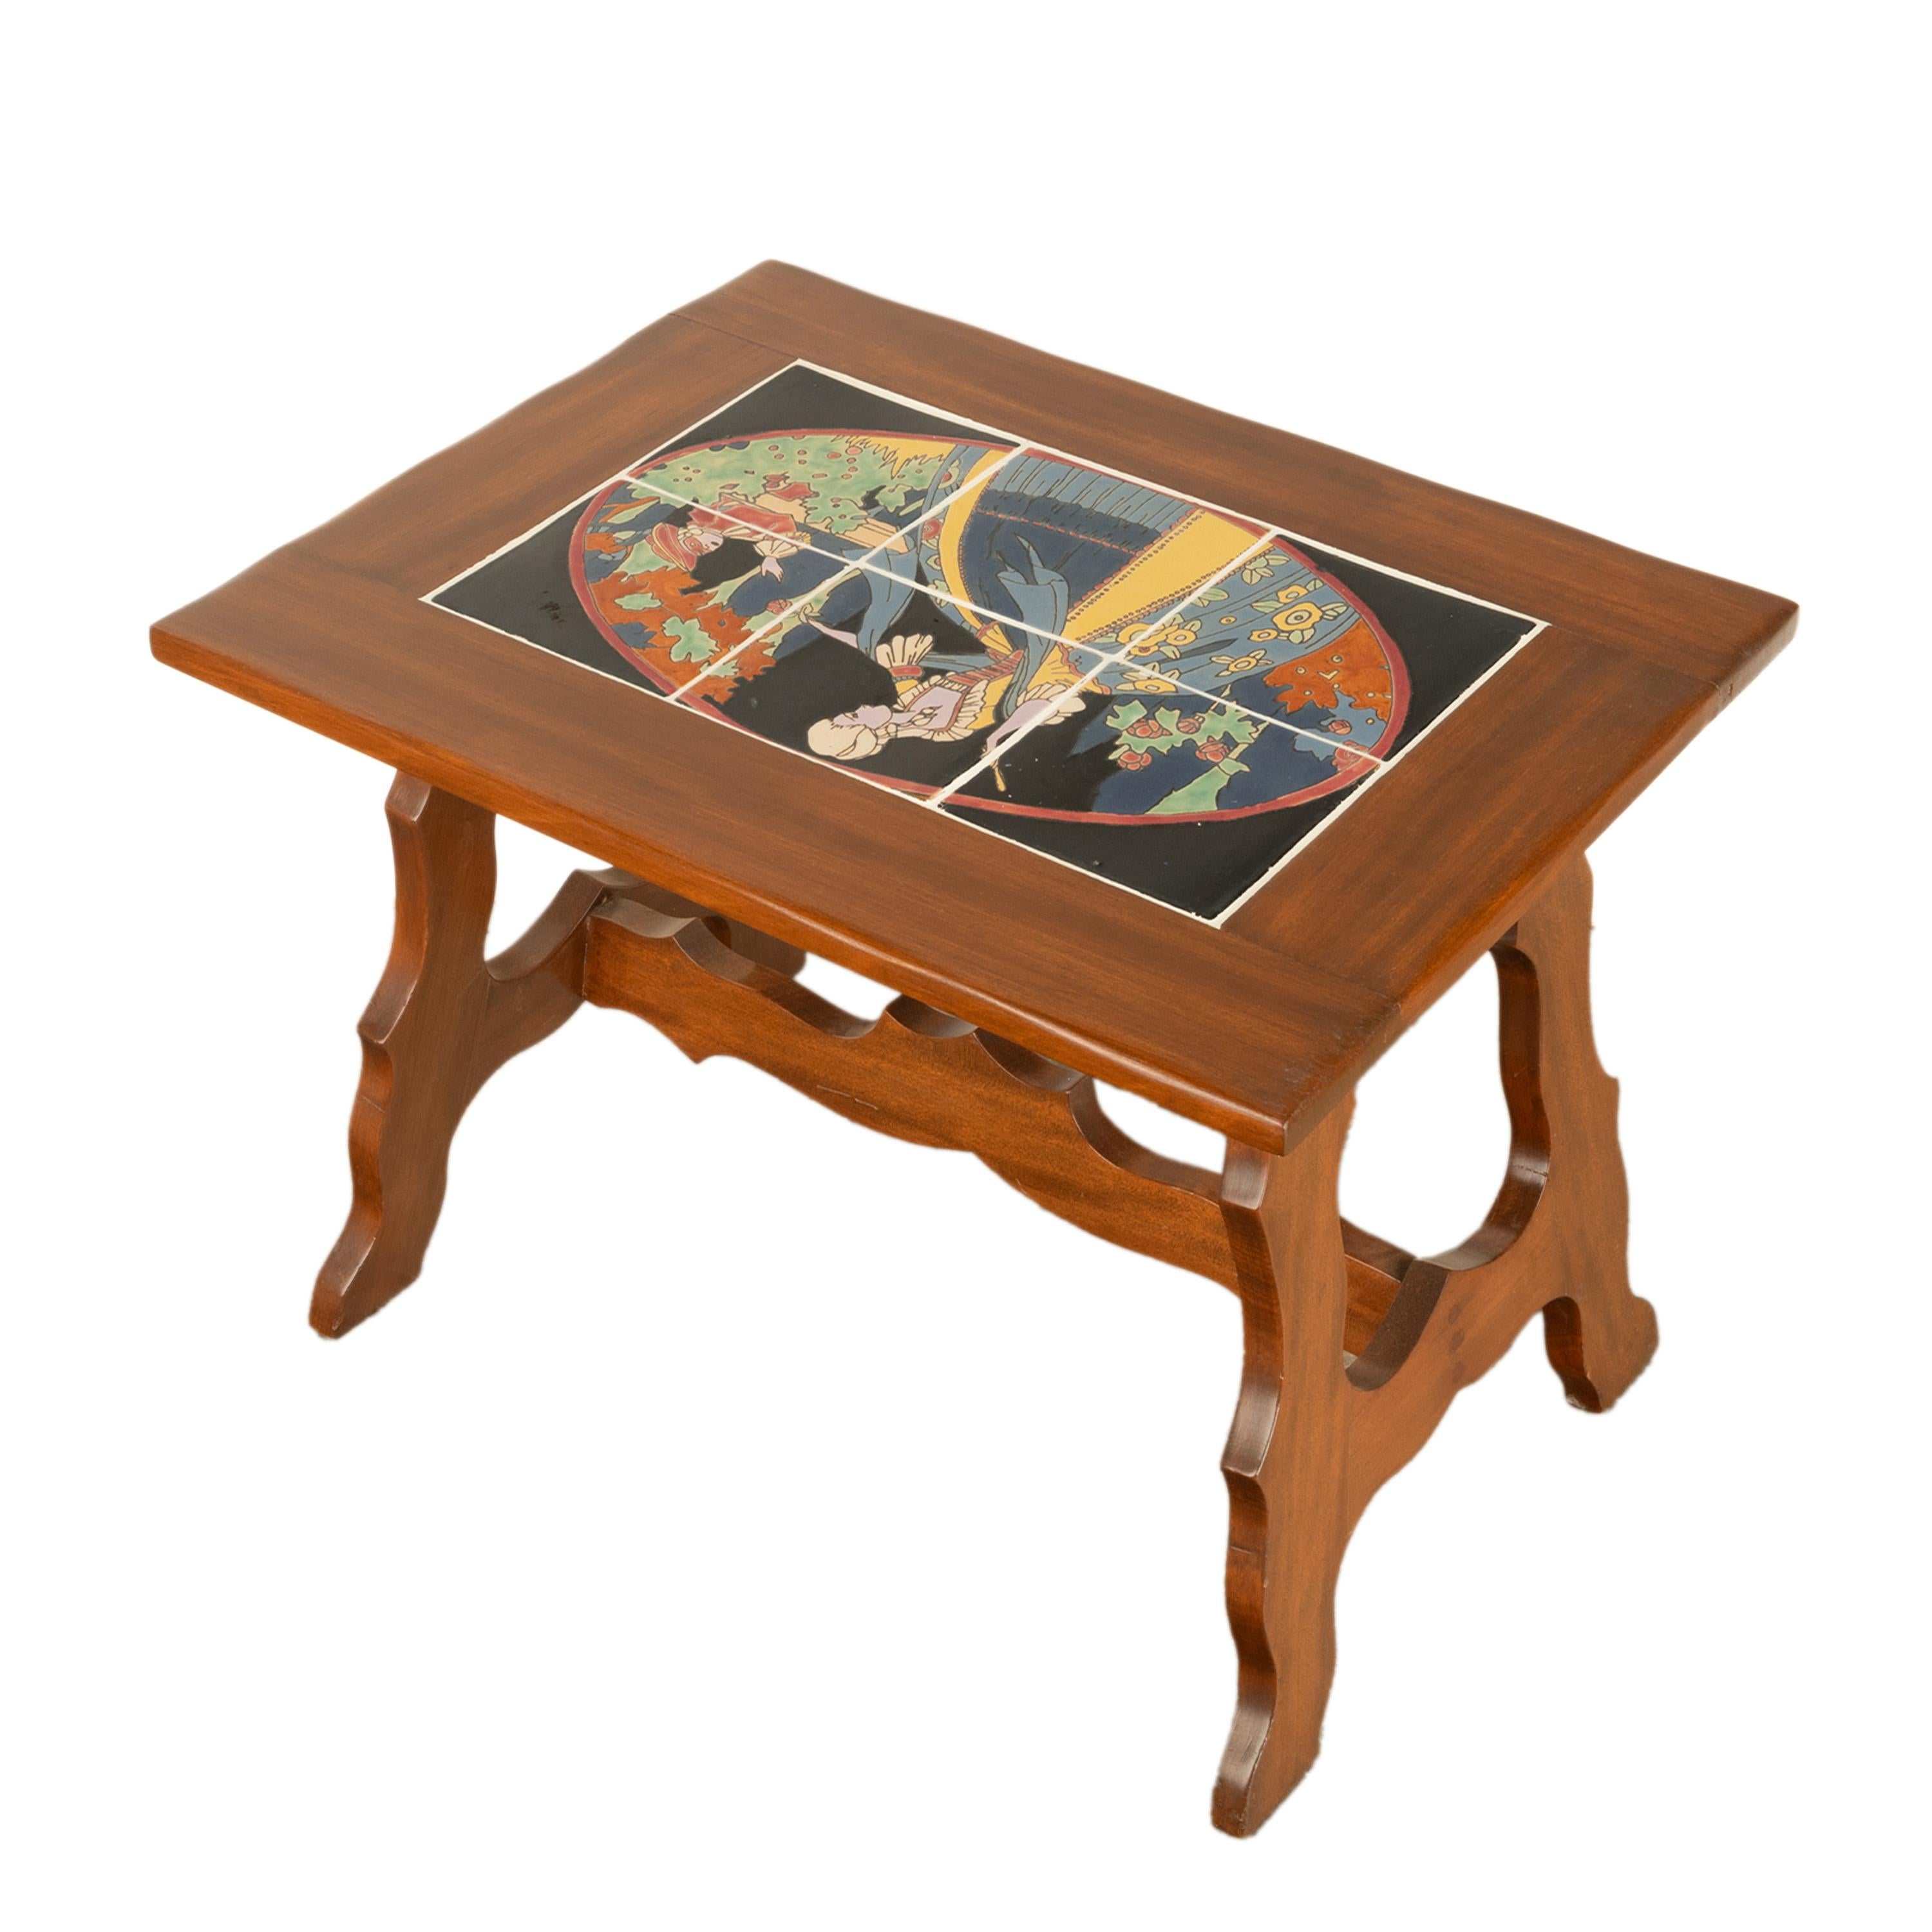 Antique Mission Catalina Monterrey California Tile Top Walnut Coffee Table 1930 For Sale 9